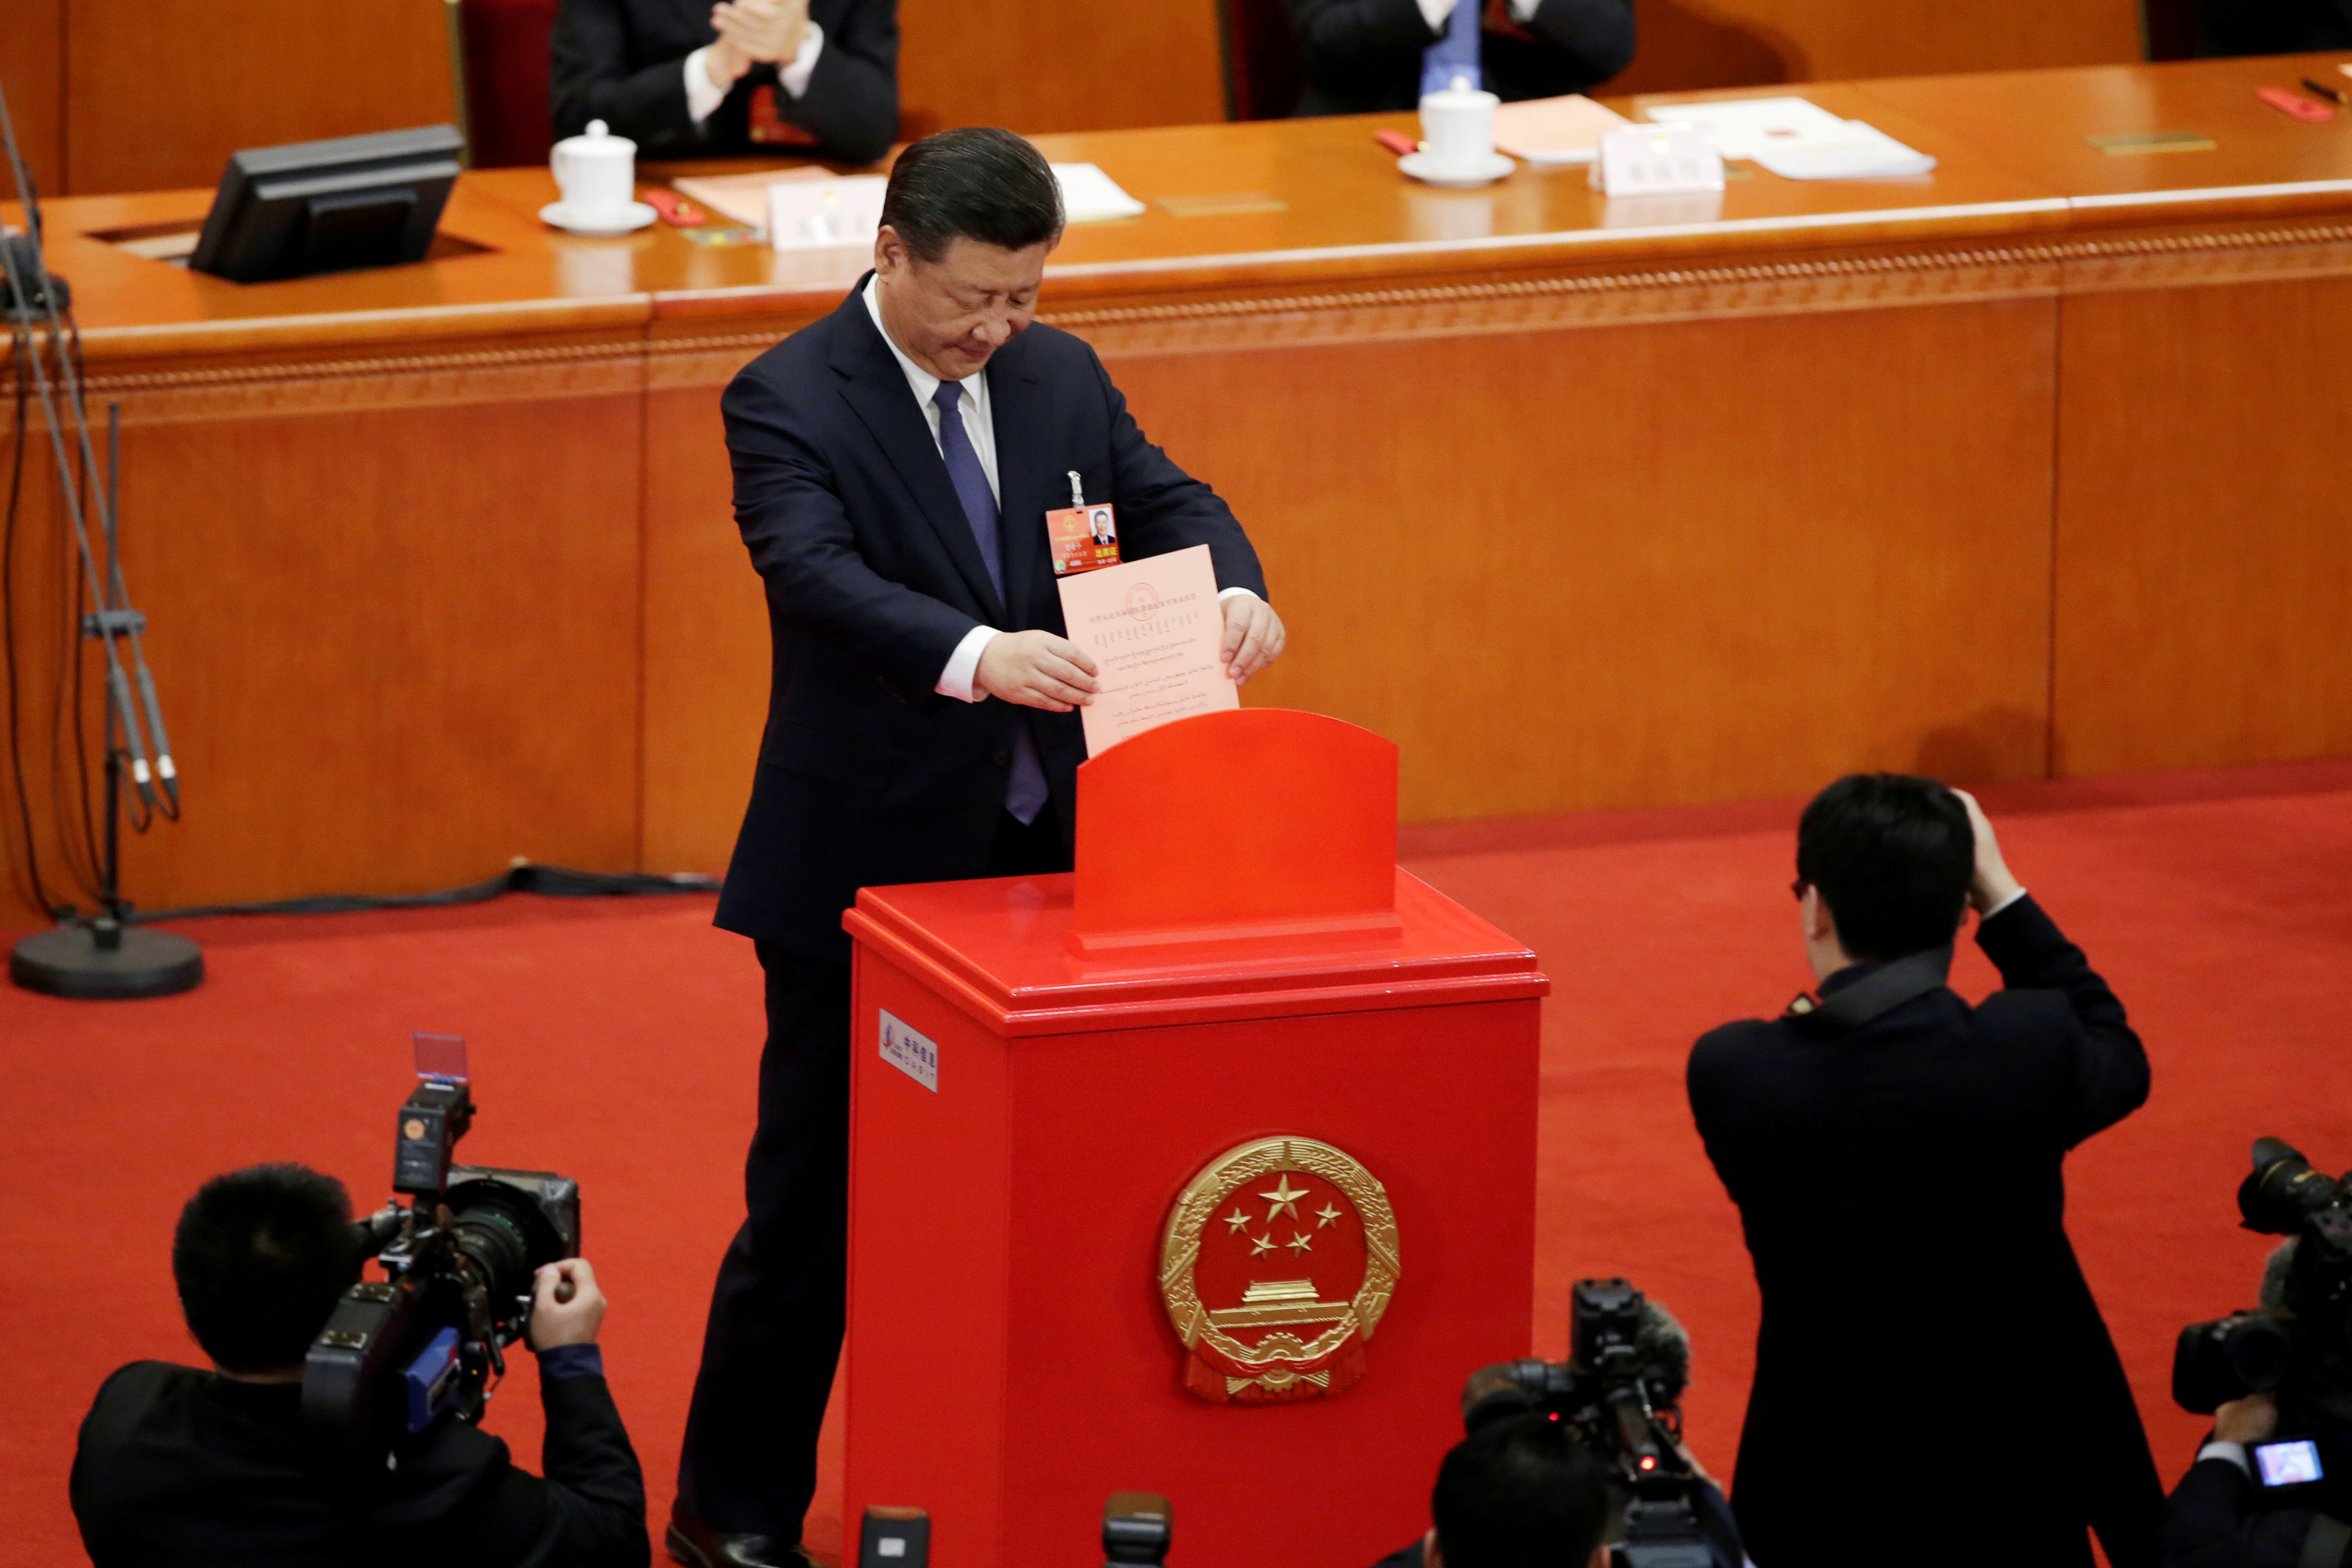 Chinese President Xi Jinping drops his ballot, during a vote on a constitutional amendment lifting presidential term limits, at the National People's Congress (NPC) at the Great Hall of the People in Beijing, China March 11, 2018. (Jason Lee—Reuters)